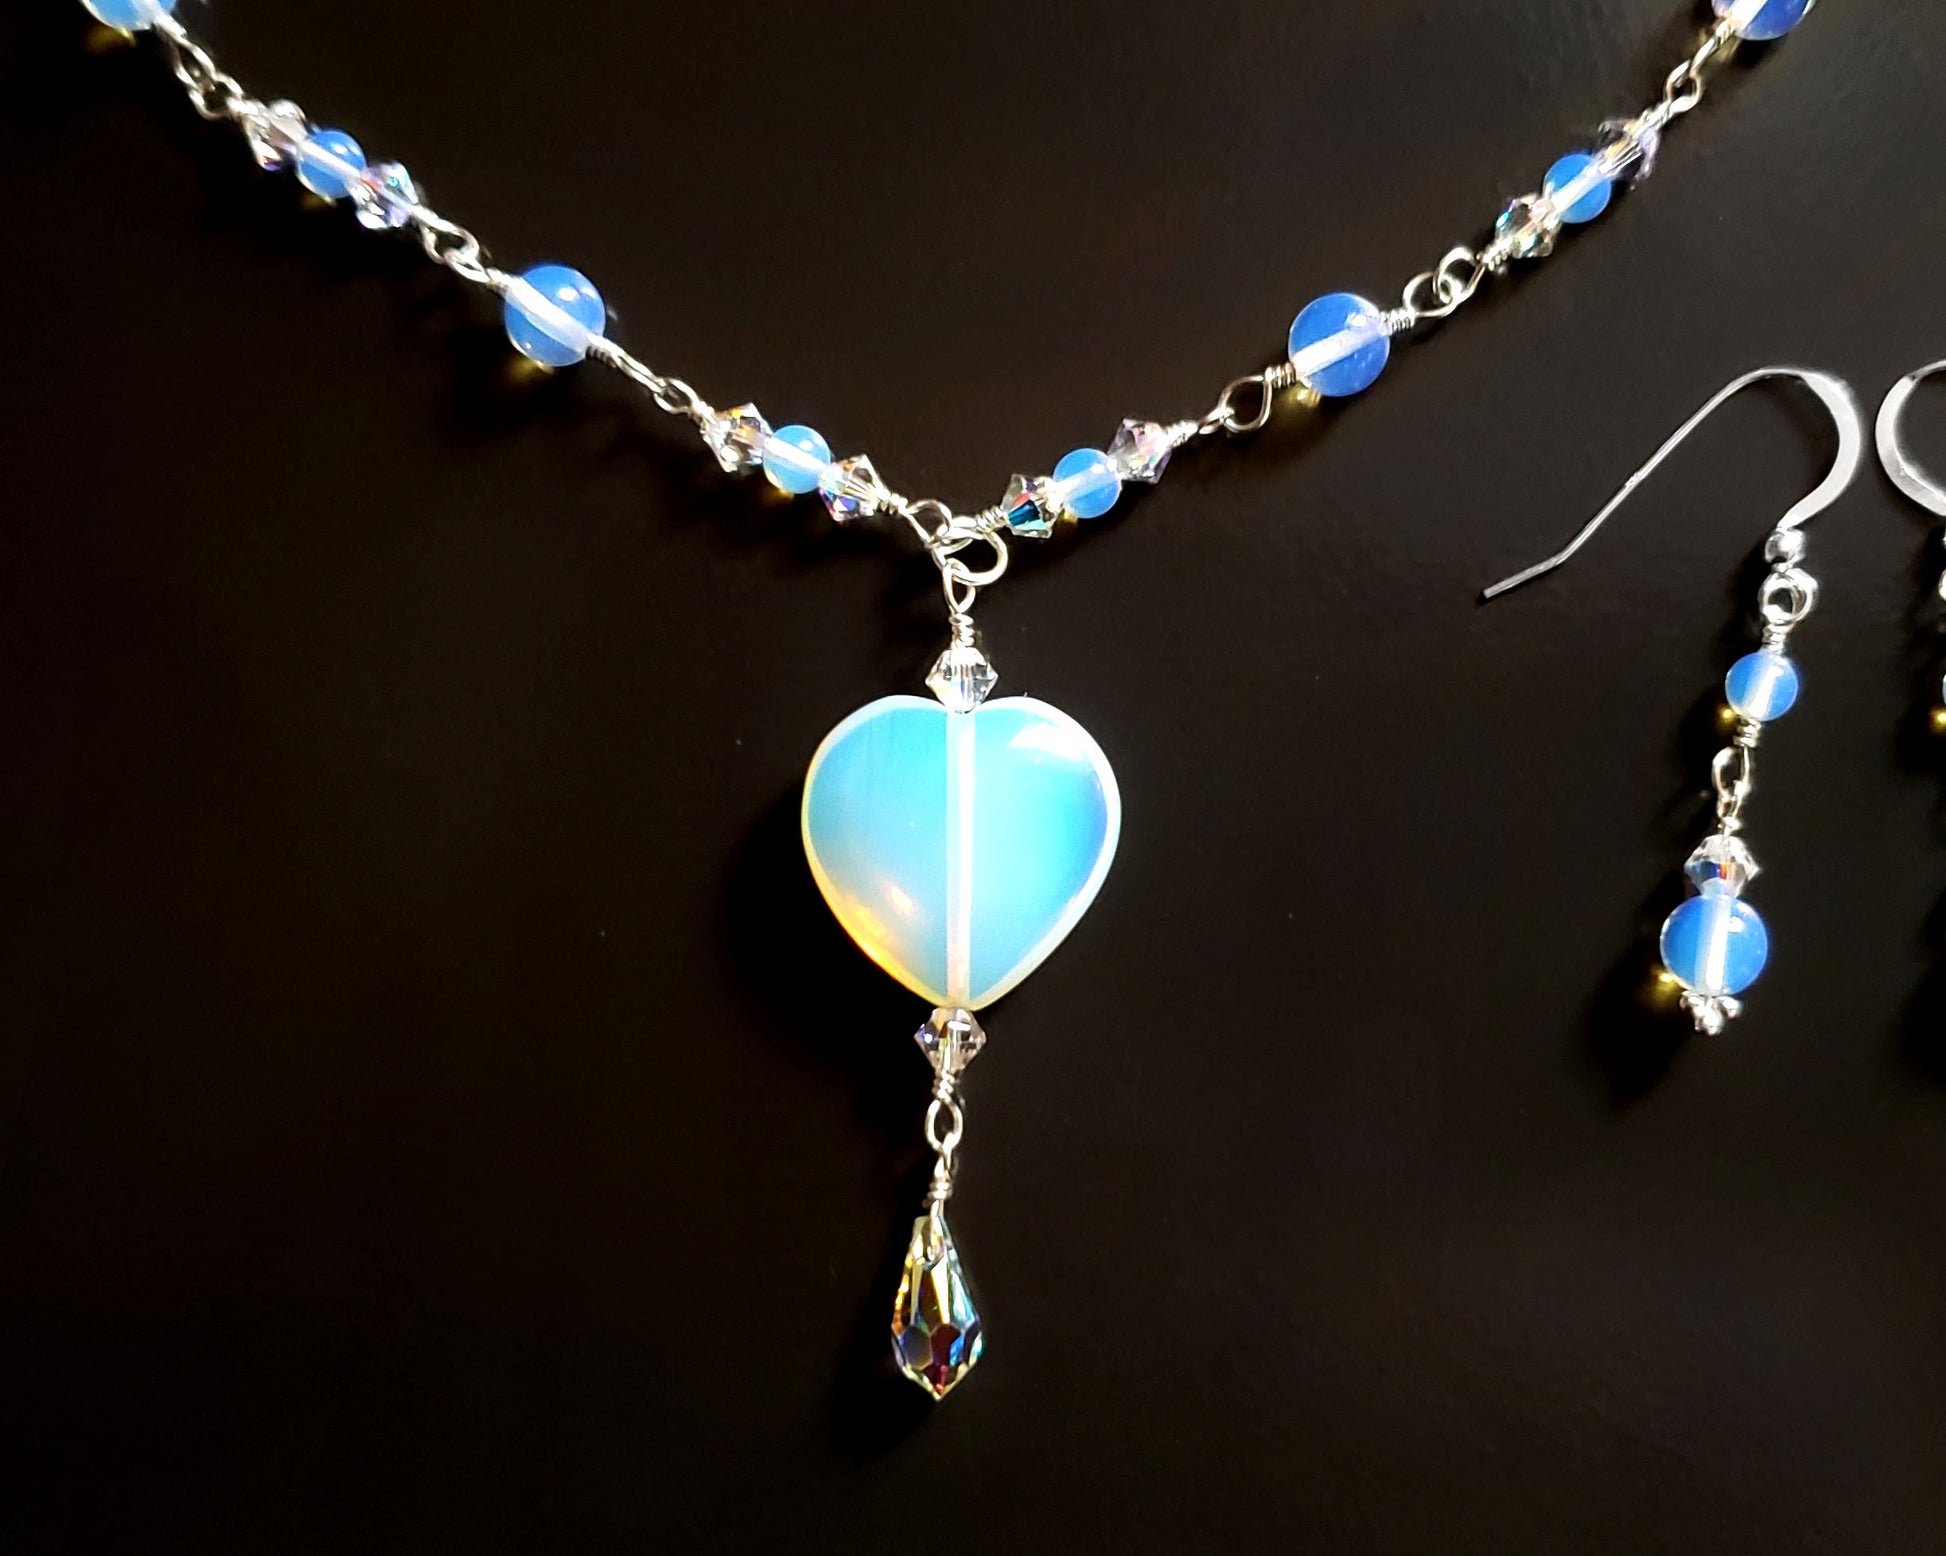 Art Deco Style Moon Glow Heart Necklace and Earring Set, Sterling Silver and Opalite Heart and beads with Crysal. A Y style necklace and dangle earring set